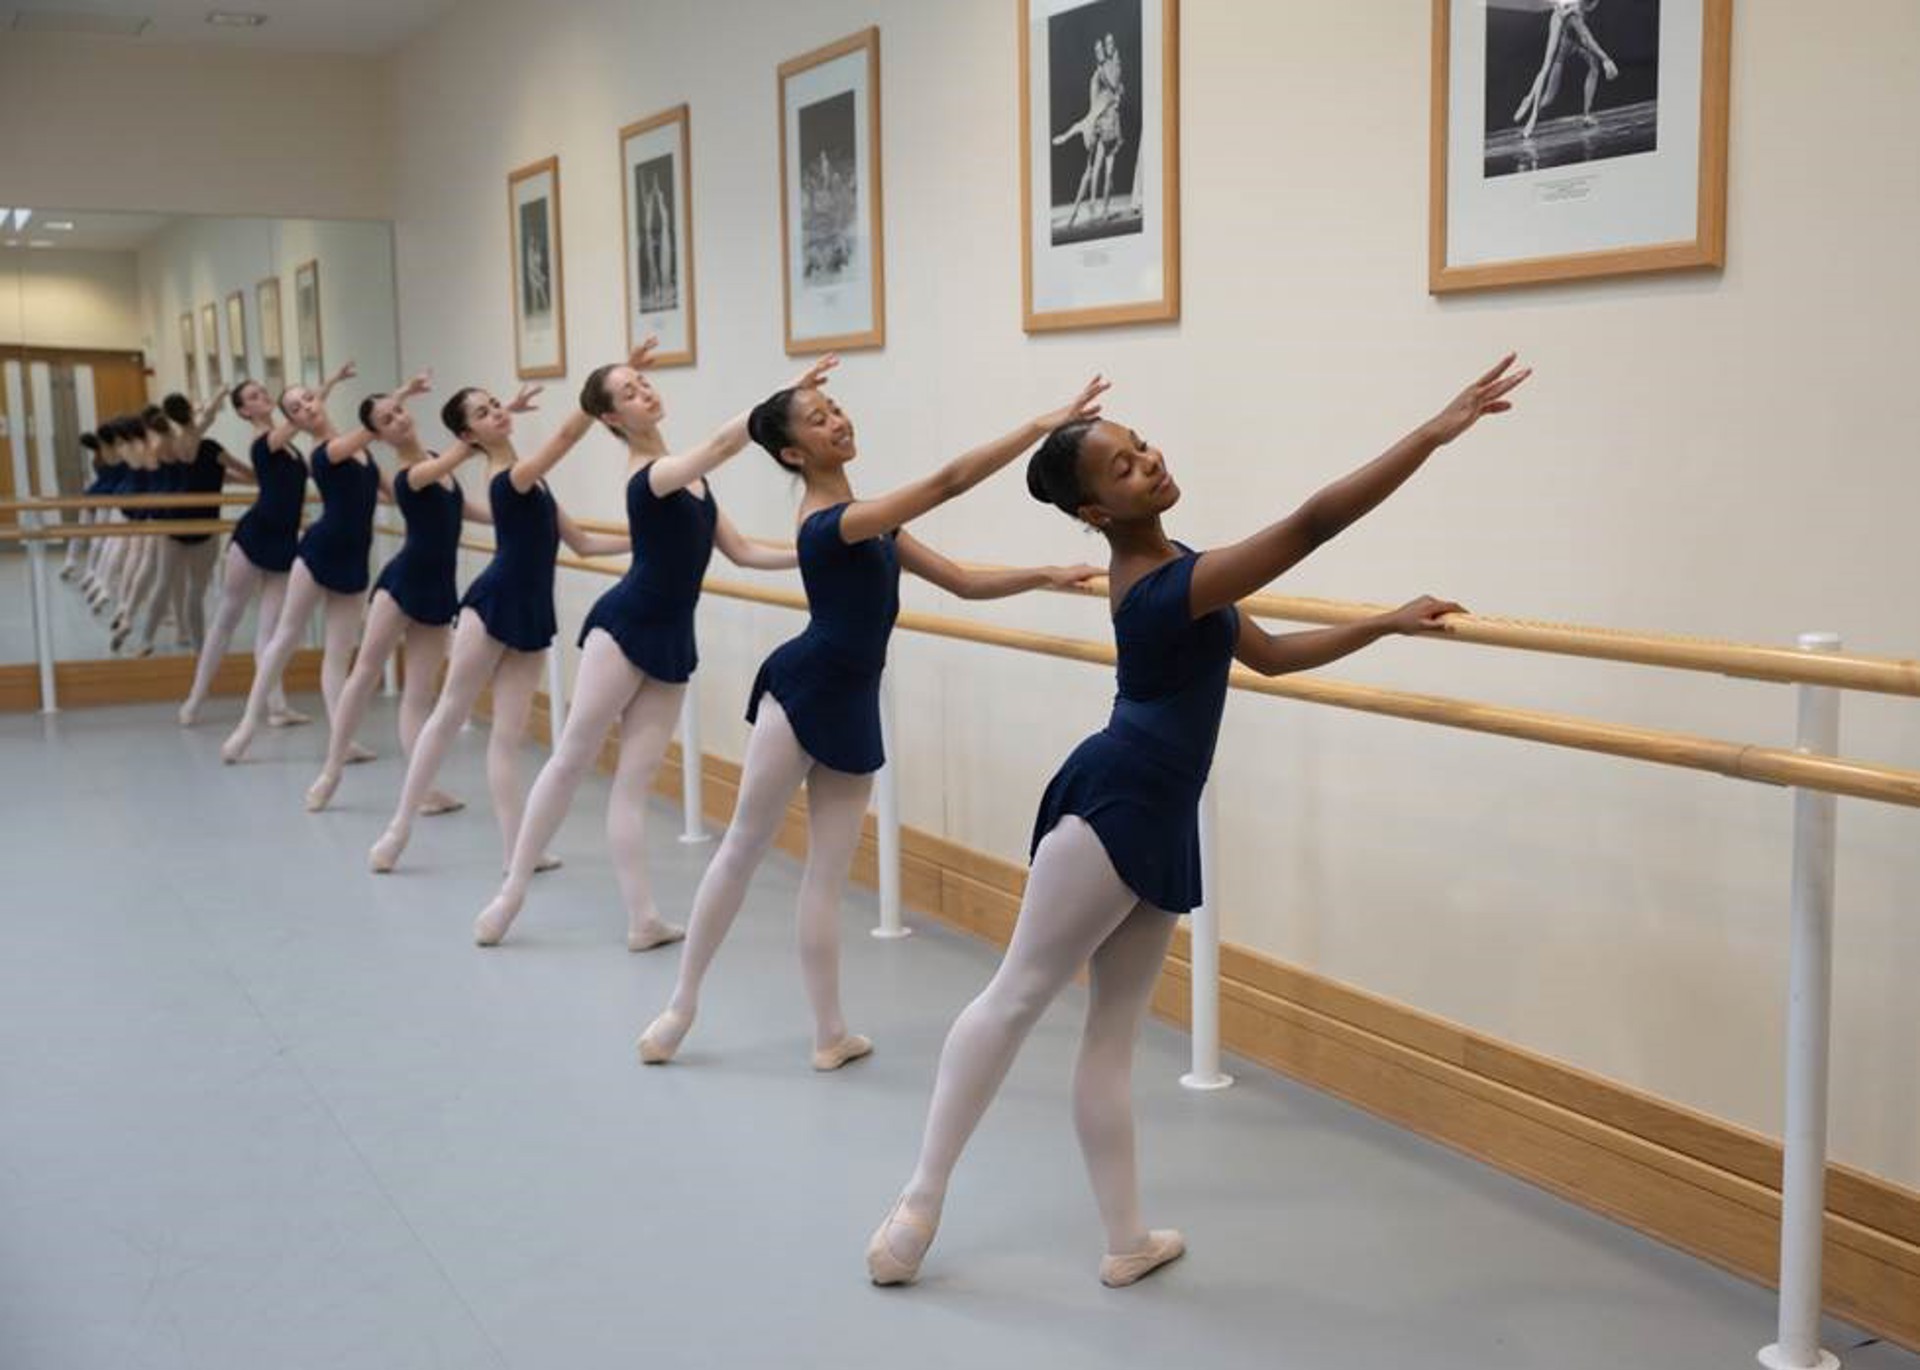 severn female young ballet dancers holding on to a ballet bar with one arm pointed to the top left of the image and the bottom left foot pointed away. Wearing blue leotards and pink tights.